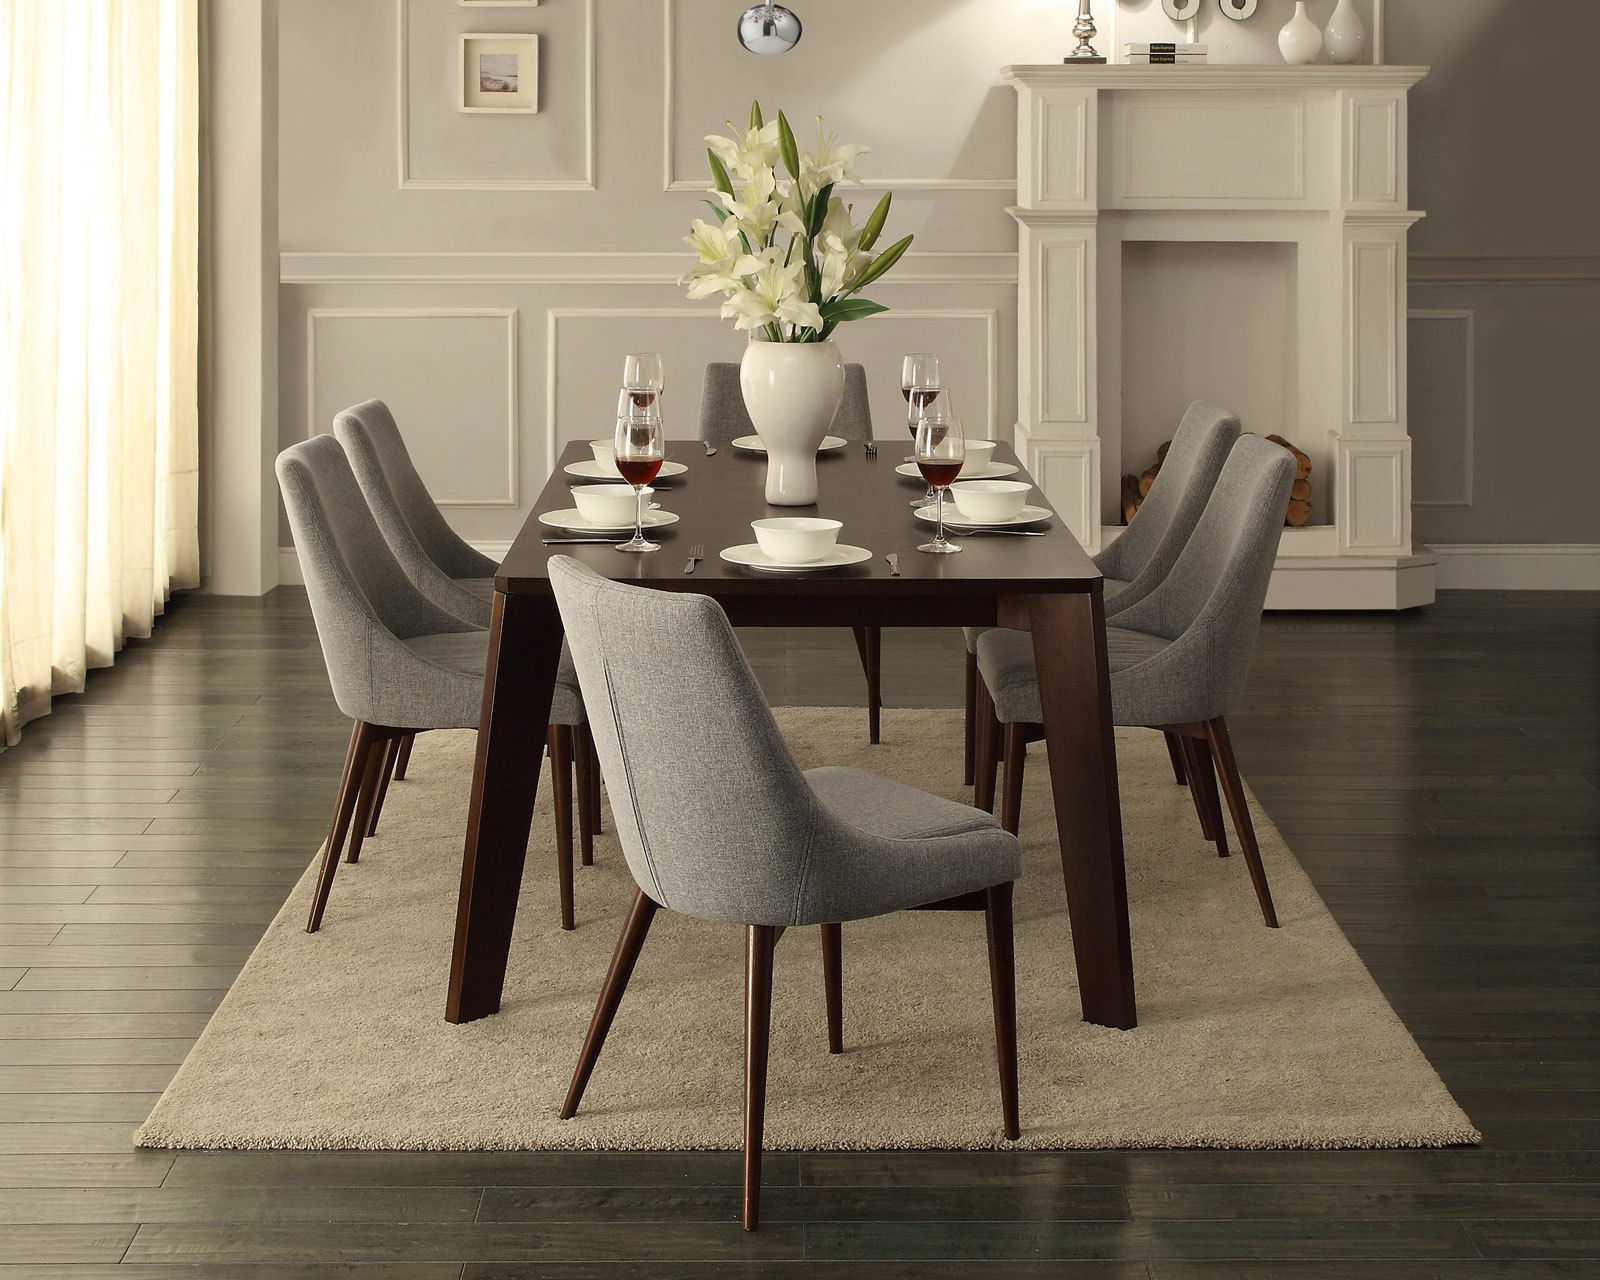 Modern Dining Room Table And Chairs